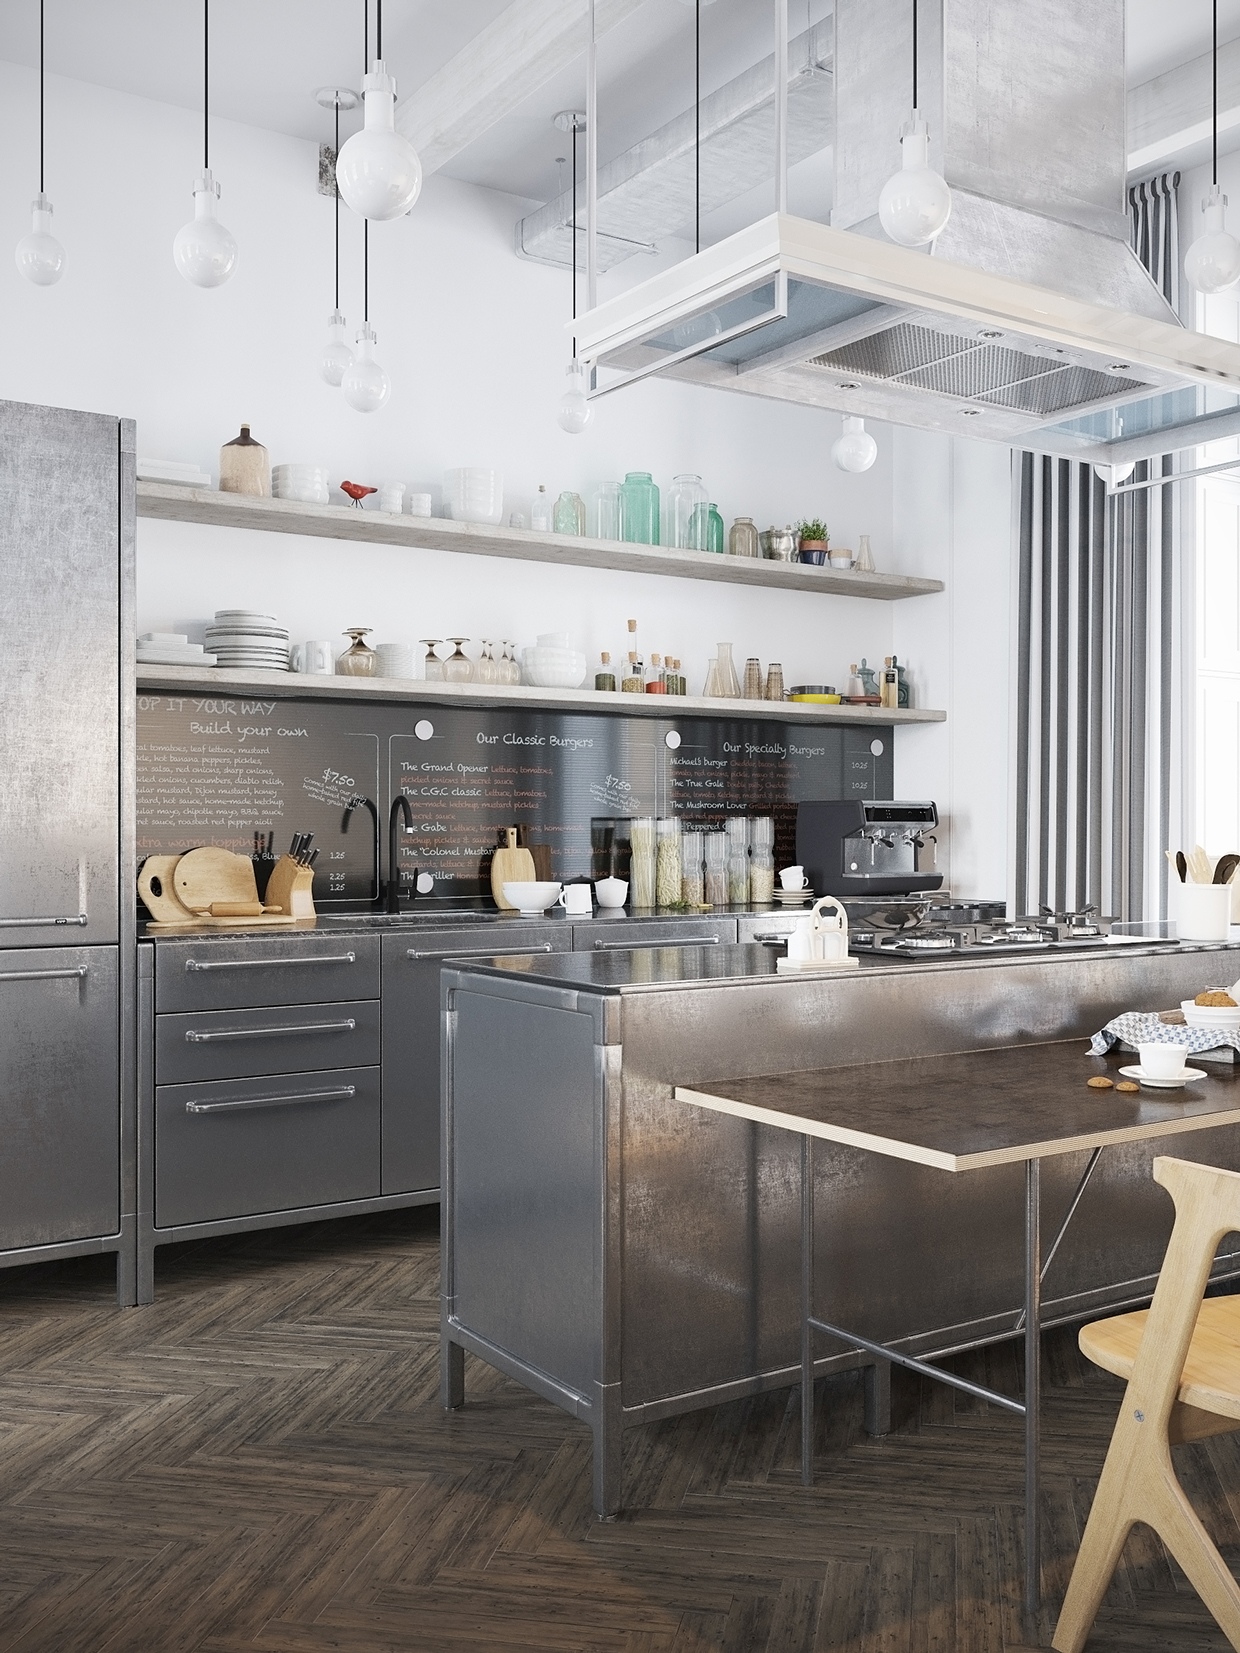 Interior design style of the Scandinavian kitchen "width =" 1240 "height =" 1653 "srcset =" https://mileray.com/wp-content/uploads/2020/05/1588512747_506_6-Beautiful-Scandinavian-Kitchen-Design-Ideas-with-A-Simple-Dining.jpg 1240w, https: // myfashionos. com / wp-content / uploads / 2016/05 / Denis-Krasikov-225x300.jpg 225w, https://mileray.com/wp-content/uploads/2016/05/Denis-Krasikov-768x1024.jpg 768w, https: //mileray.com/wp-content/uploads/2016/05/Denis-Krasikov-696x928.jpg 696w, https://mileray.com/wp-content/uploads/2016/05/Denis-Krasikov-1068x1424.jpg 1068w, https://mileray.com/wp-content/uploads/2016/05/Denis-Krasikov-315x420.jpg 315w "Sizes =" (maximum width: 1240px) 100vw, 1240px